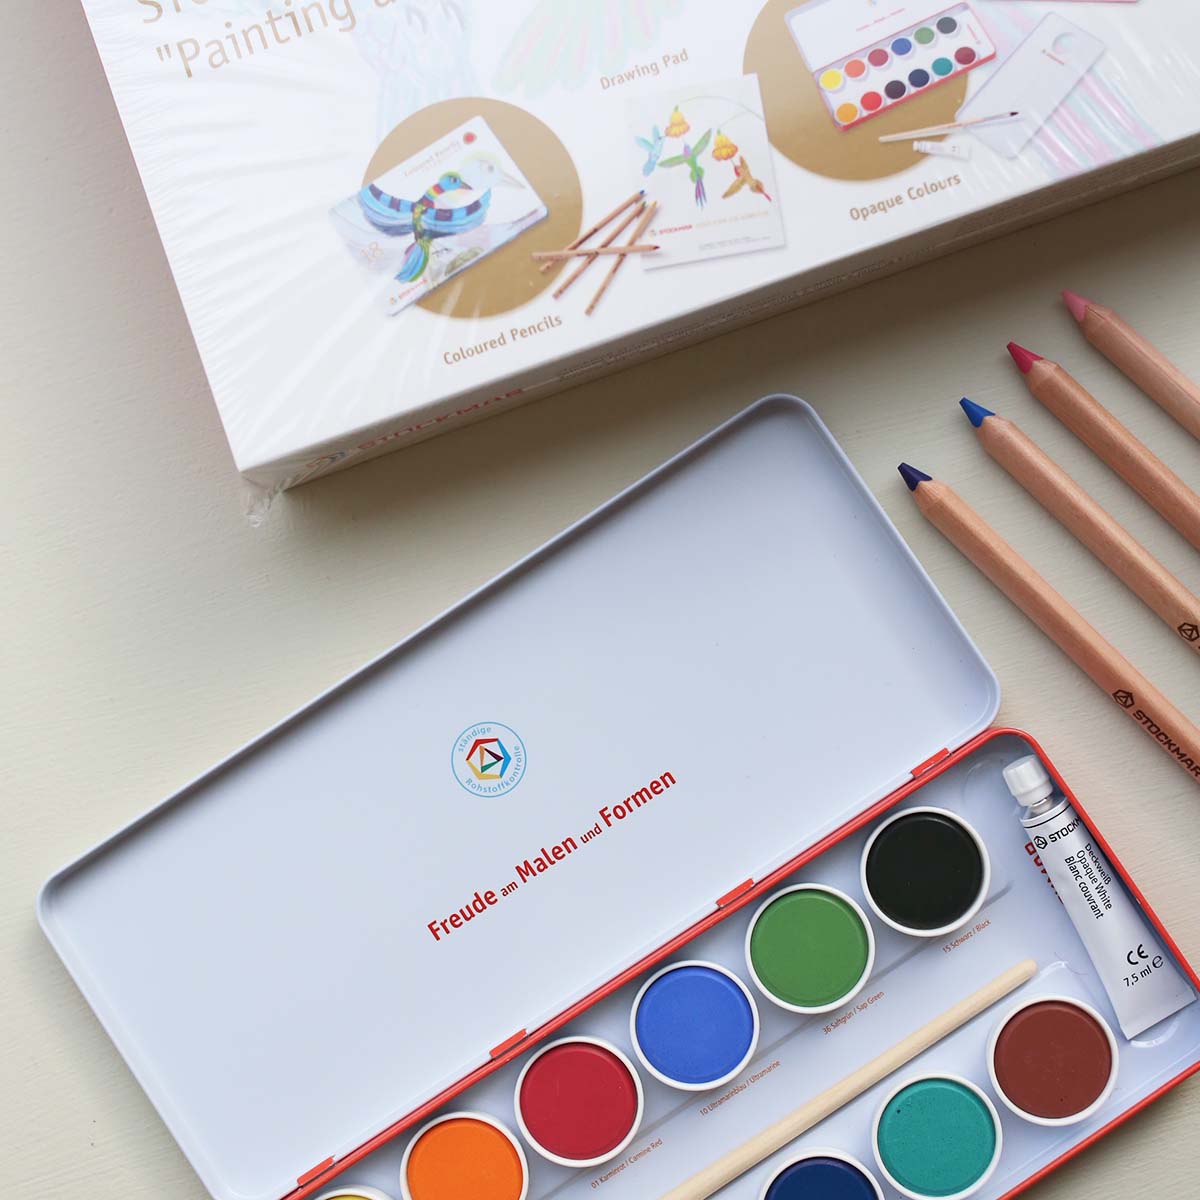 PAINTING AND DRAWING SET